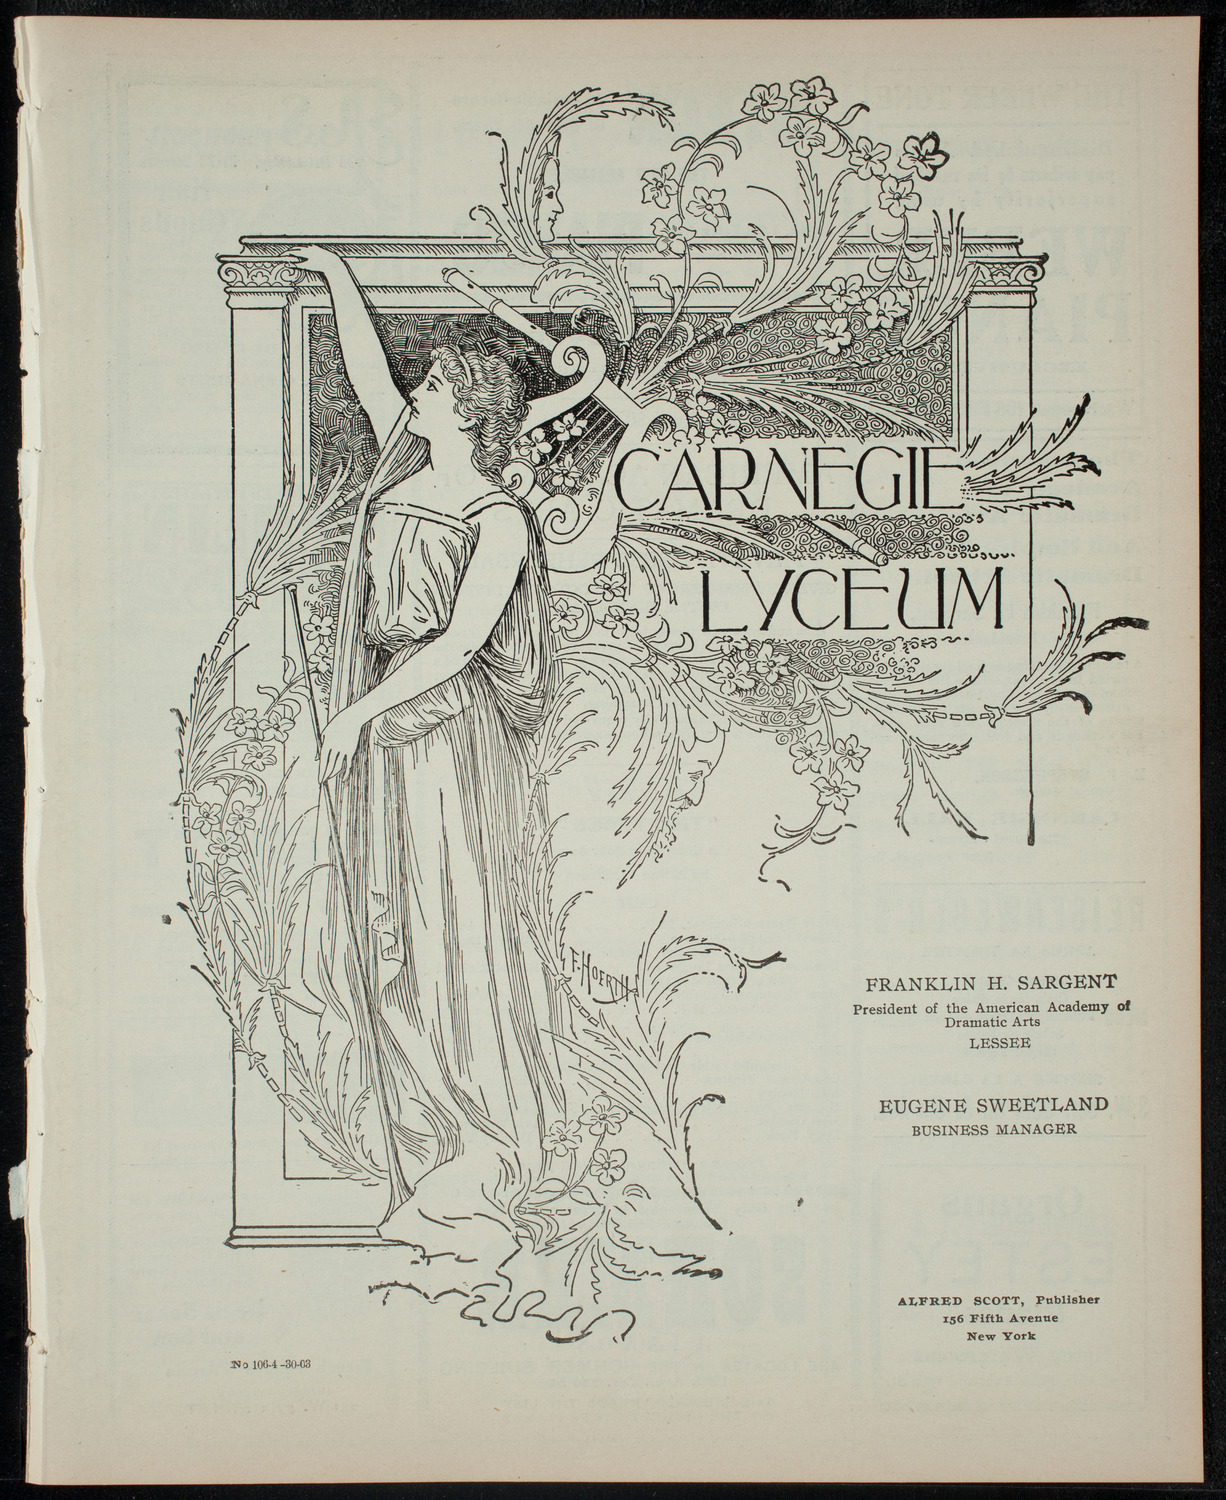 American Academy of Dramatic Arts, April 30, 1903, program page 1